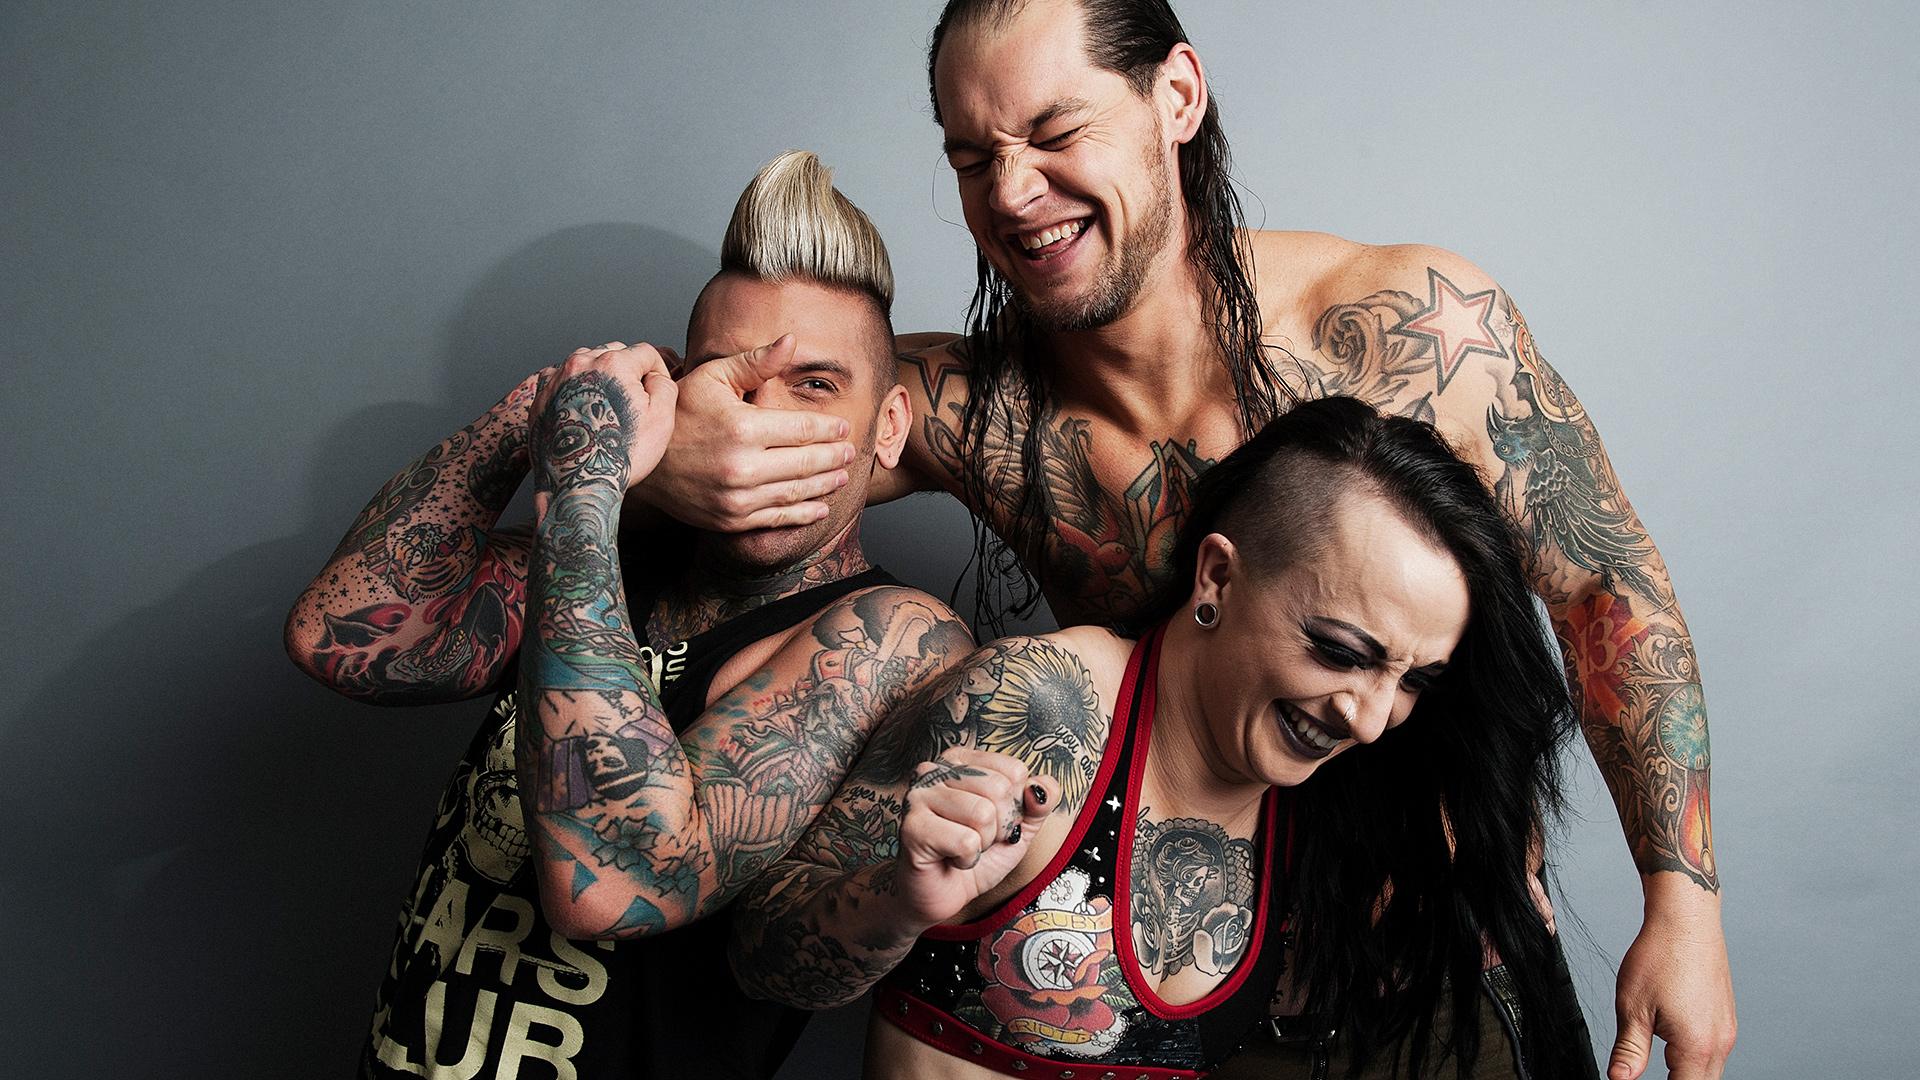 Baron Corbin, Ruby Riott and Corey Graves featured in the latest